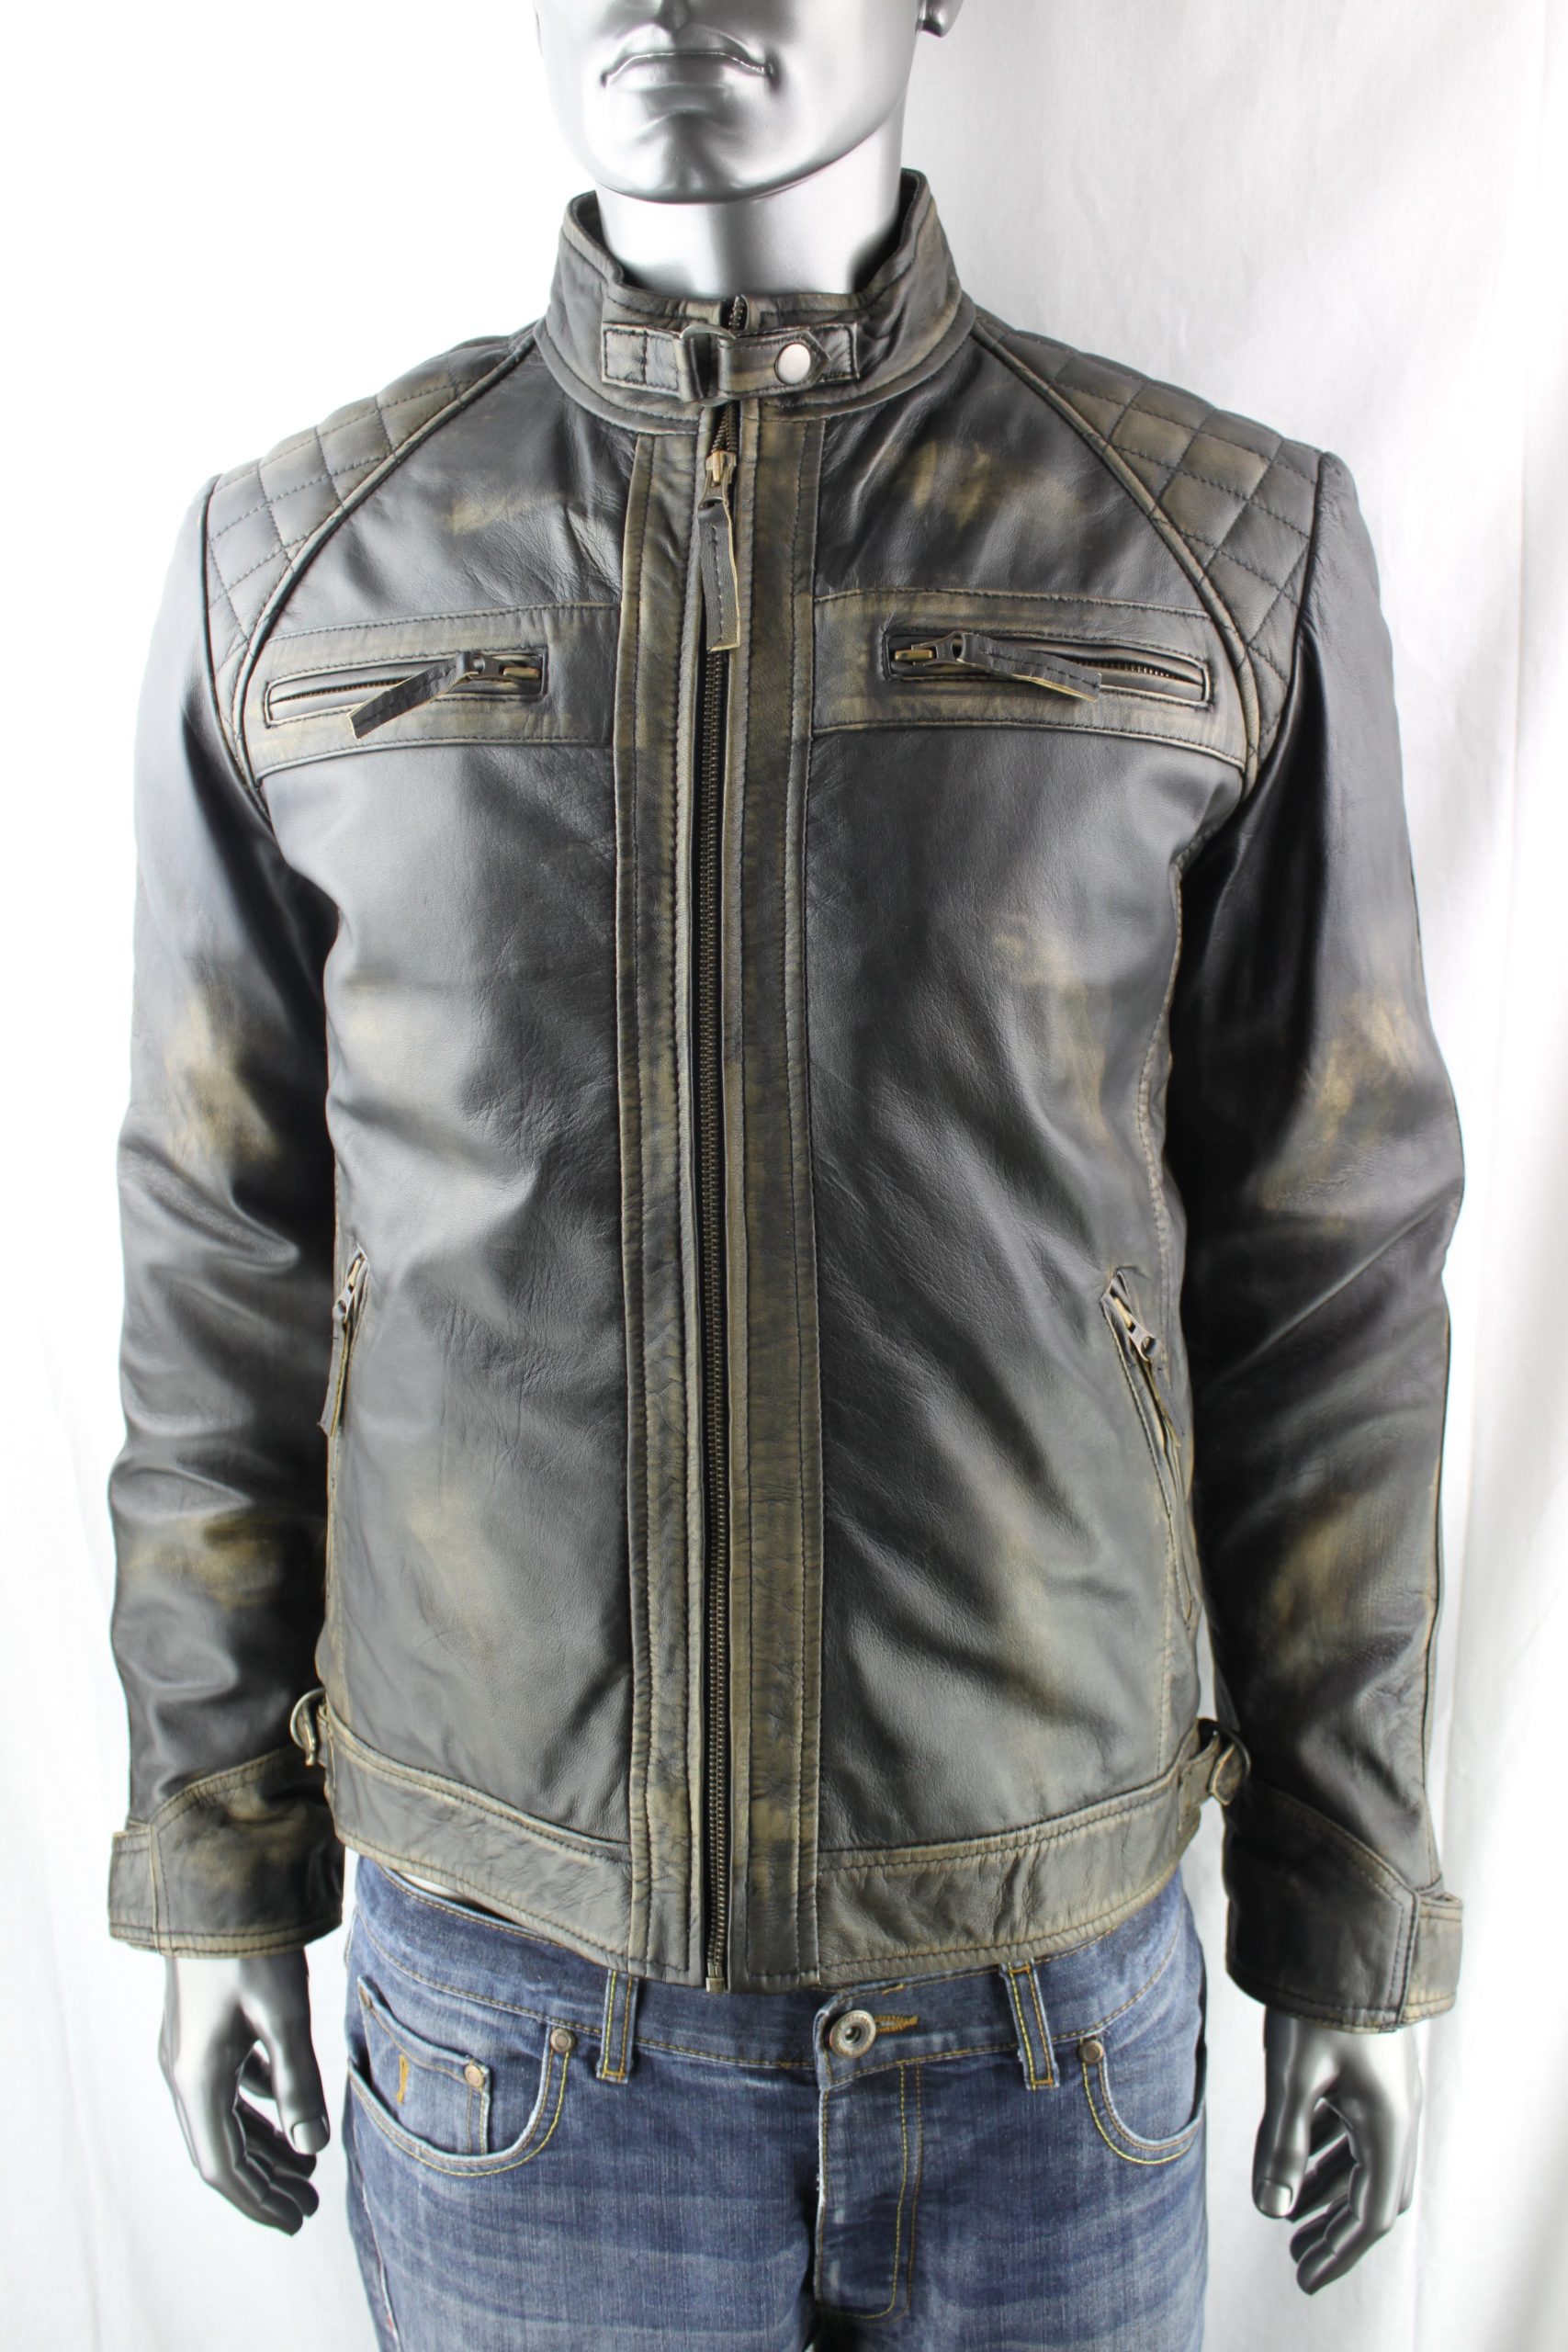 Men S Vintage Leather Biker Jacket In Black Rub Off Radford Leather Fashions Quality Leather And Sheepskin Jackets For Men And Women Coventry West Midlands Uk For Over 40 Years